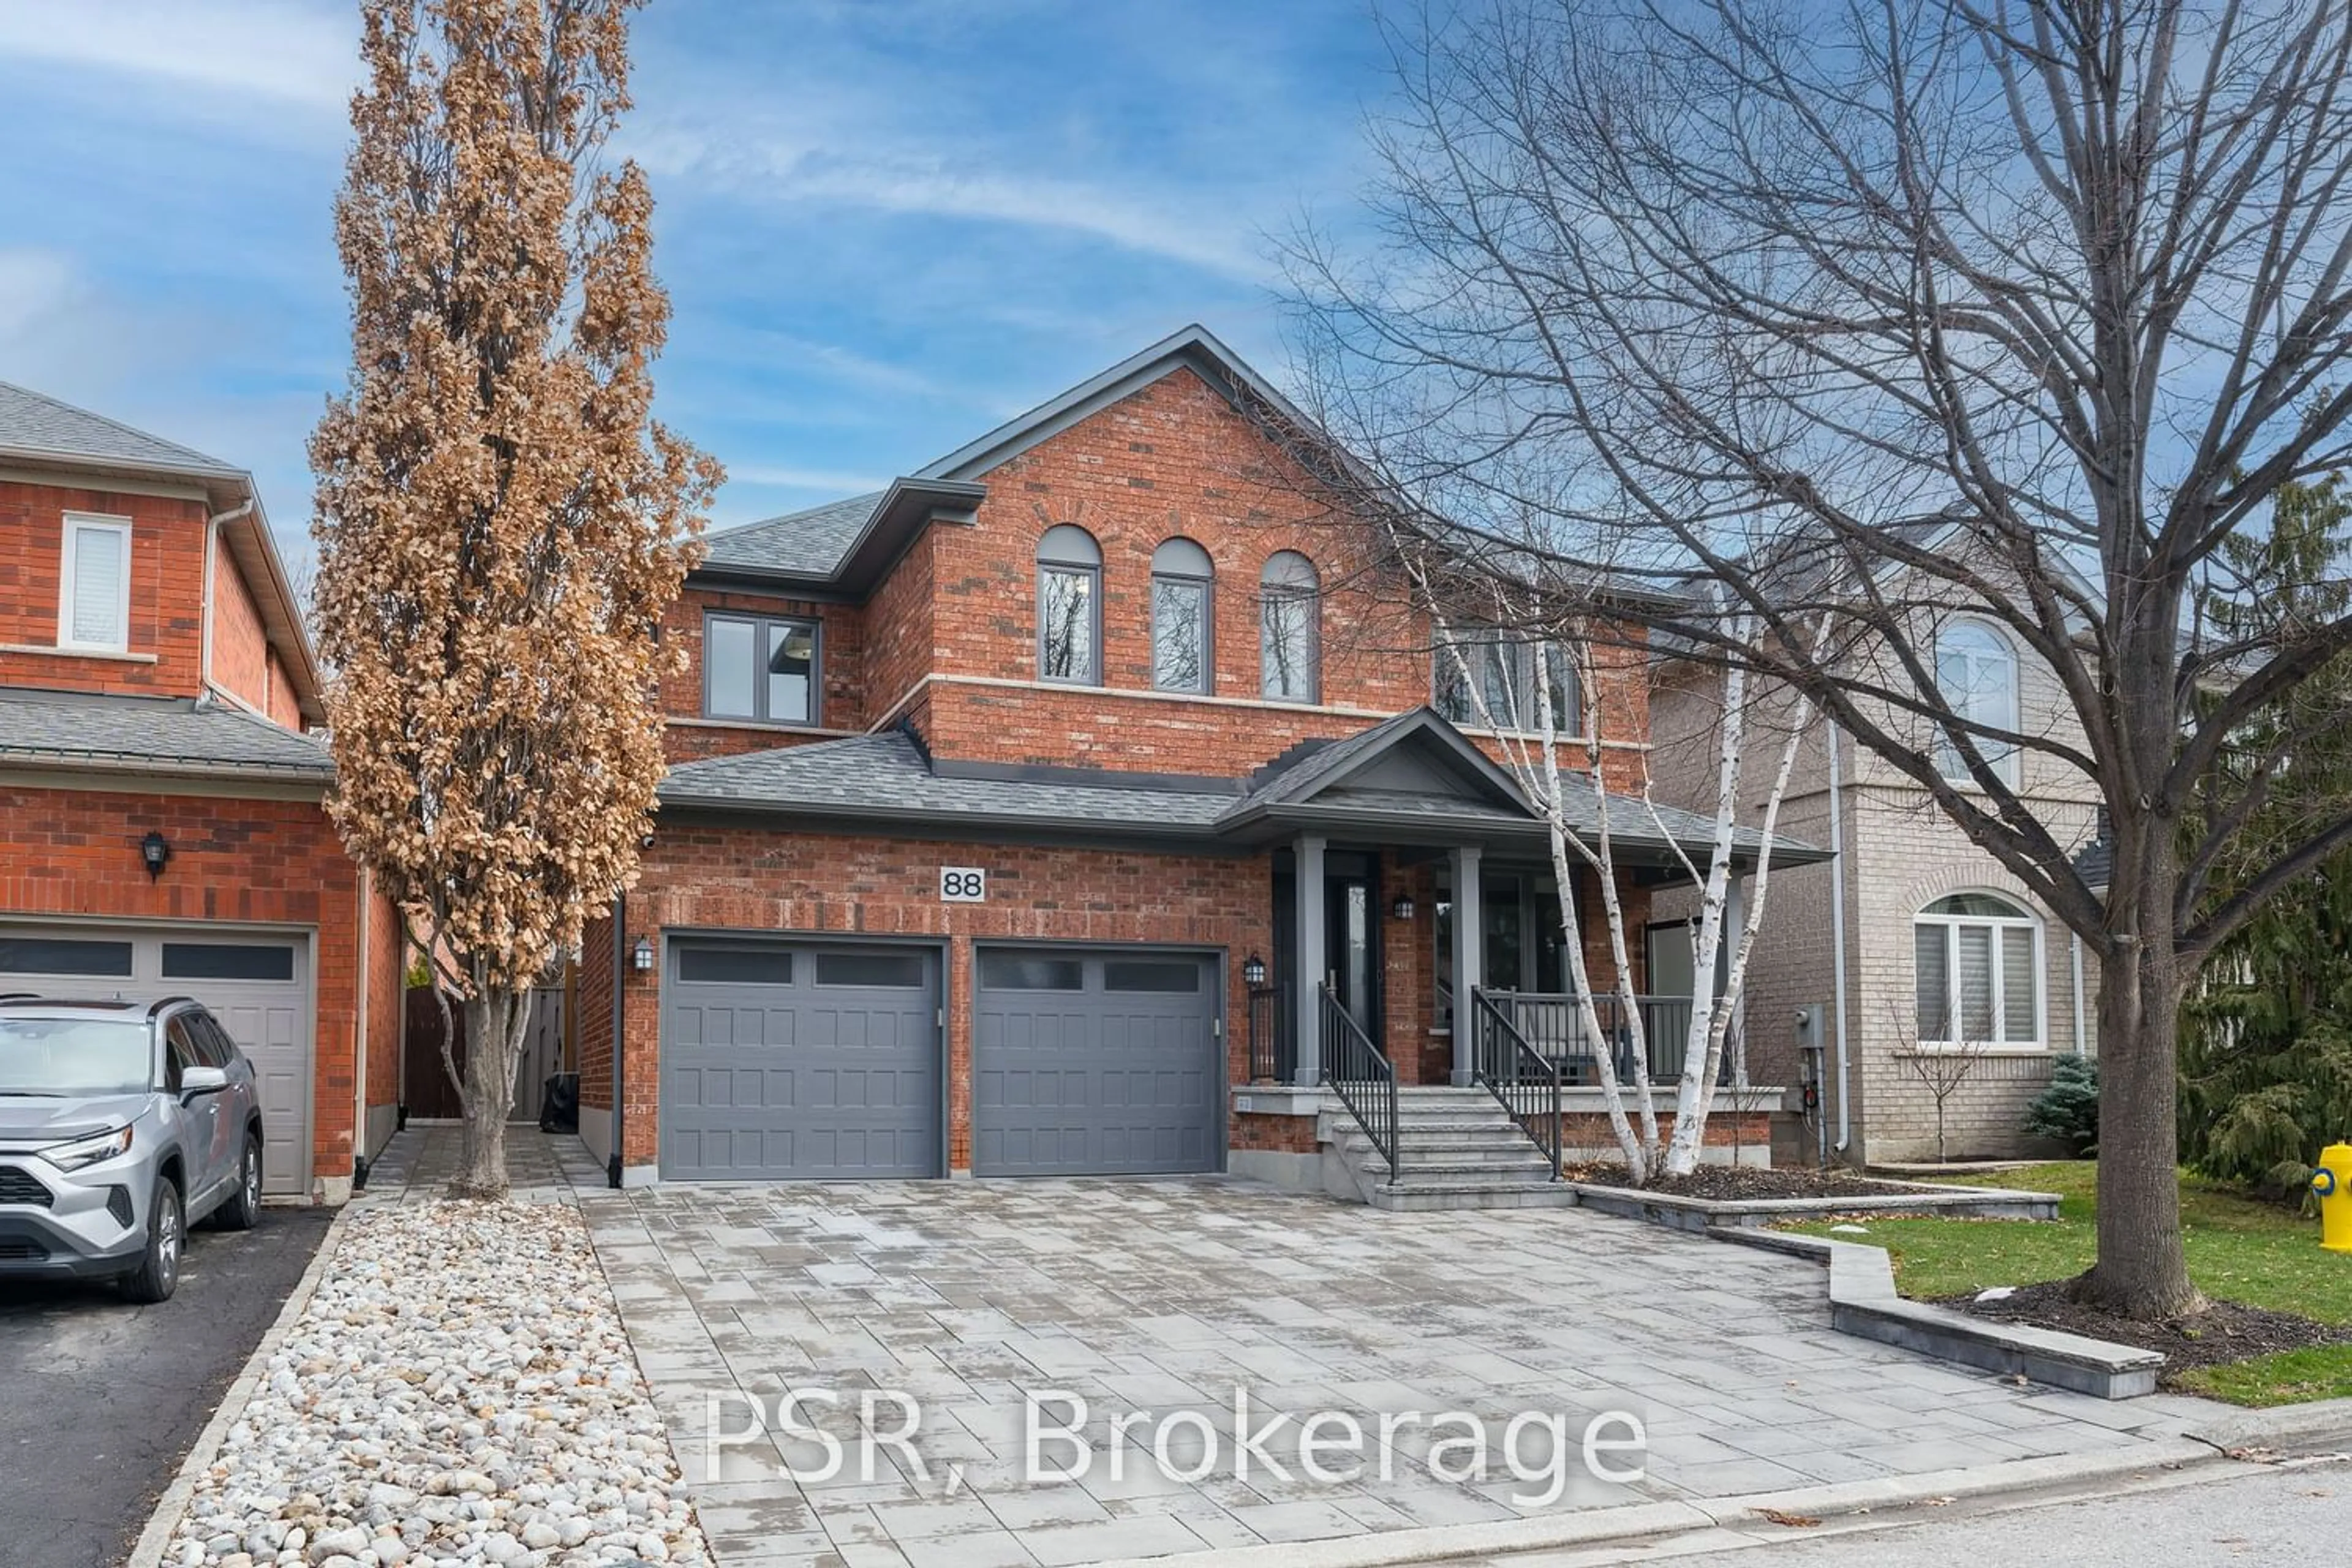 Home with brick exterior material for 88 Rota Cres, Vaughan Ontario L4H 1K8